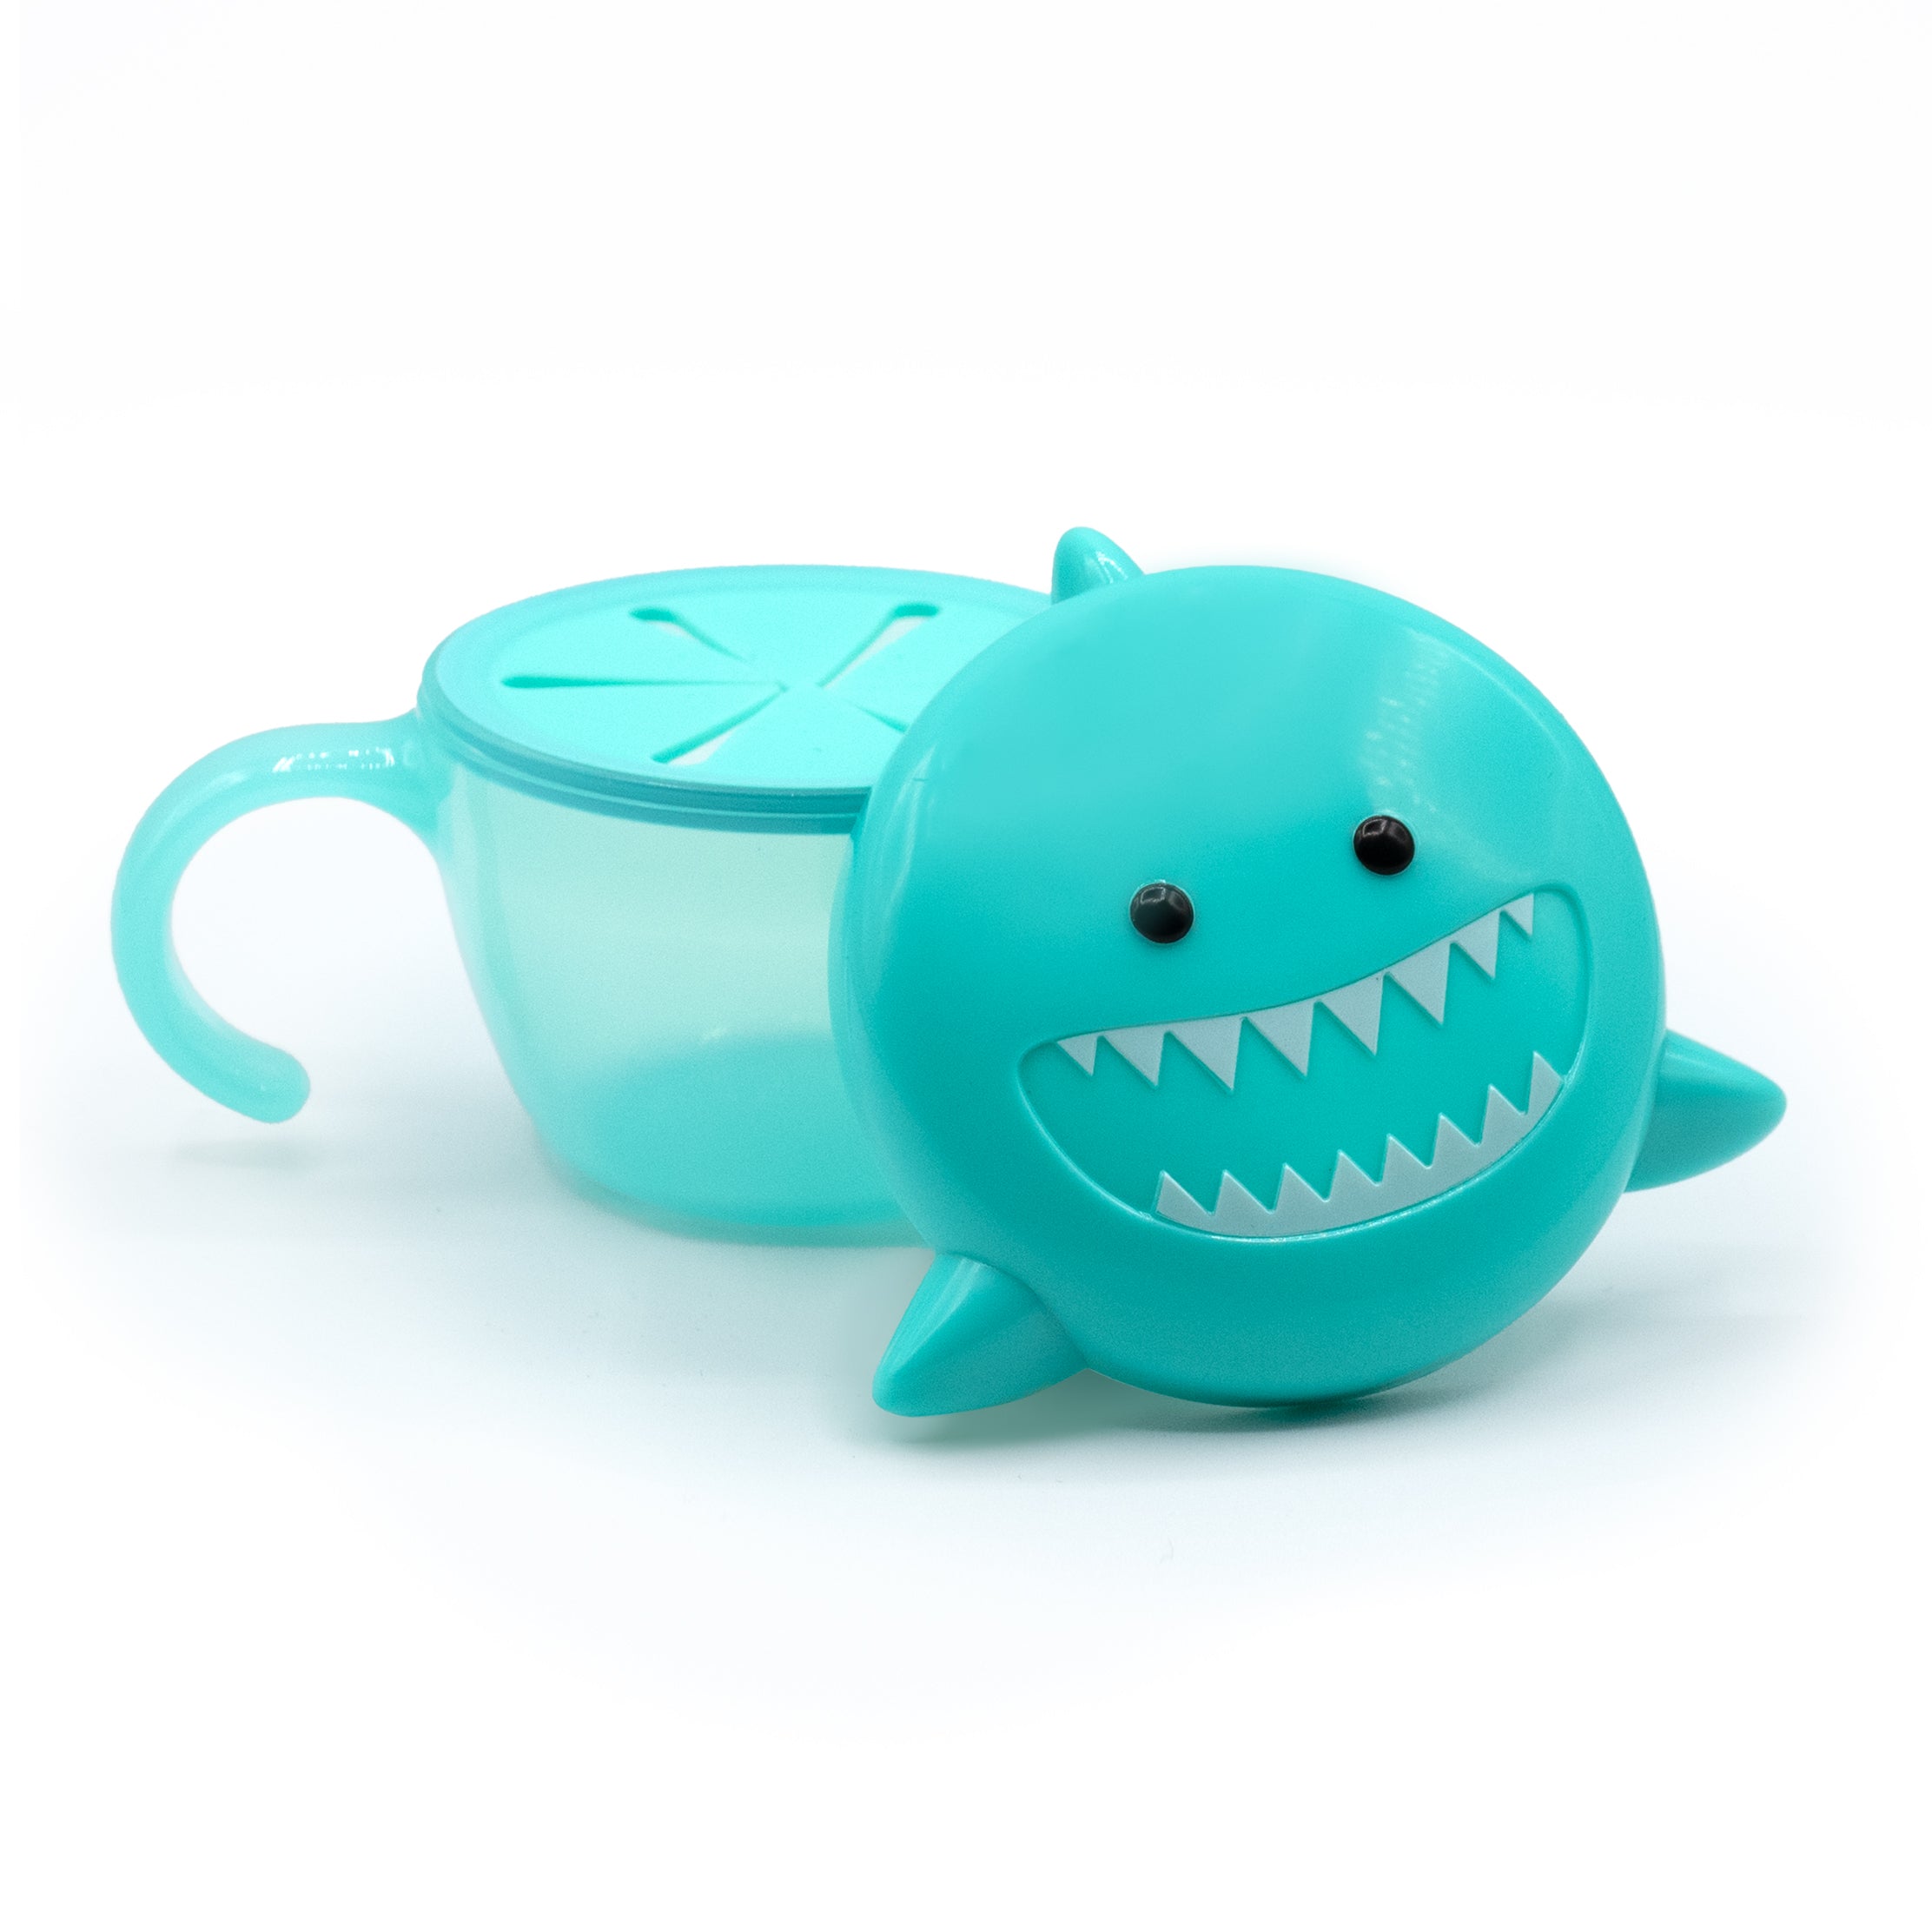 Melii Shark Snack Container - CTC Health